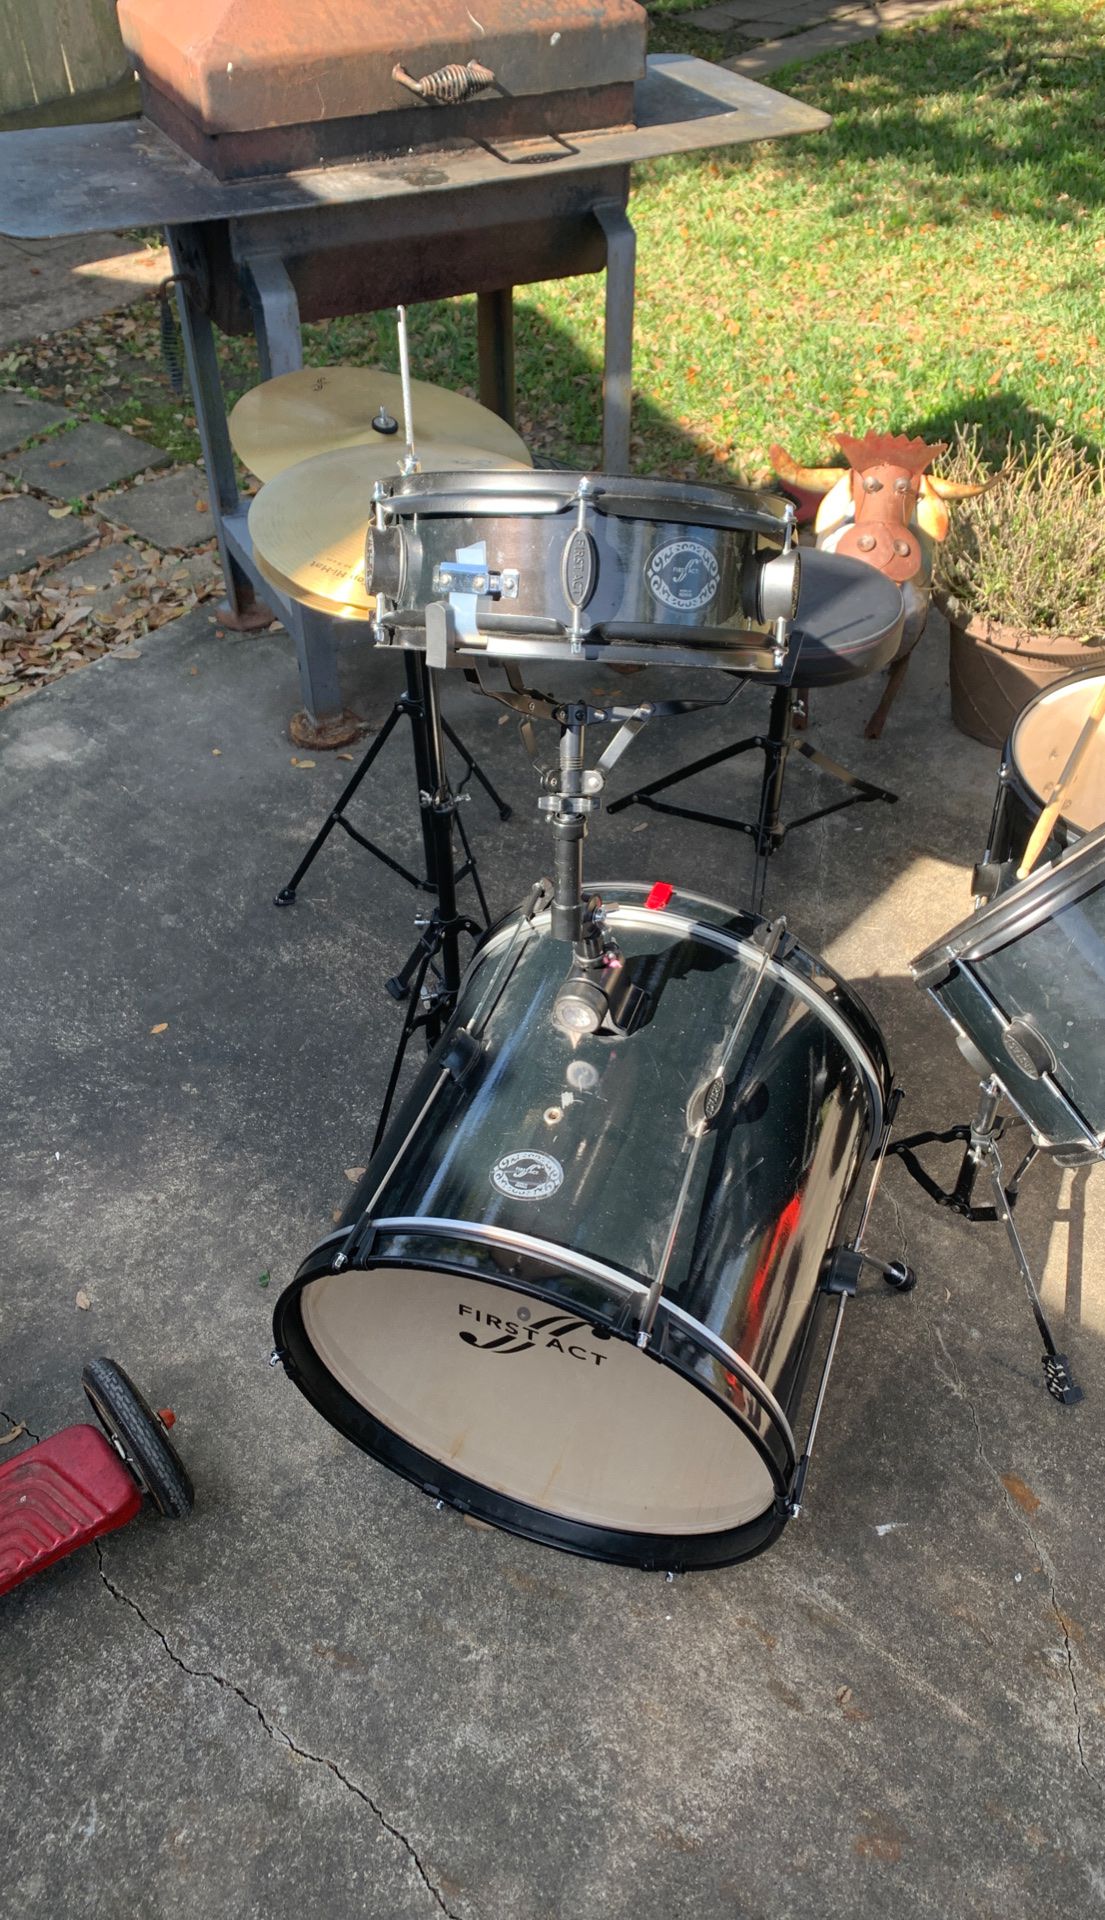 First Act (7) Piece Drum Set (including seat as 1 piece) $100 OBO